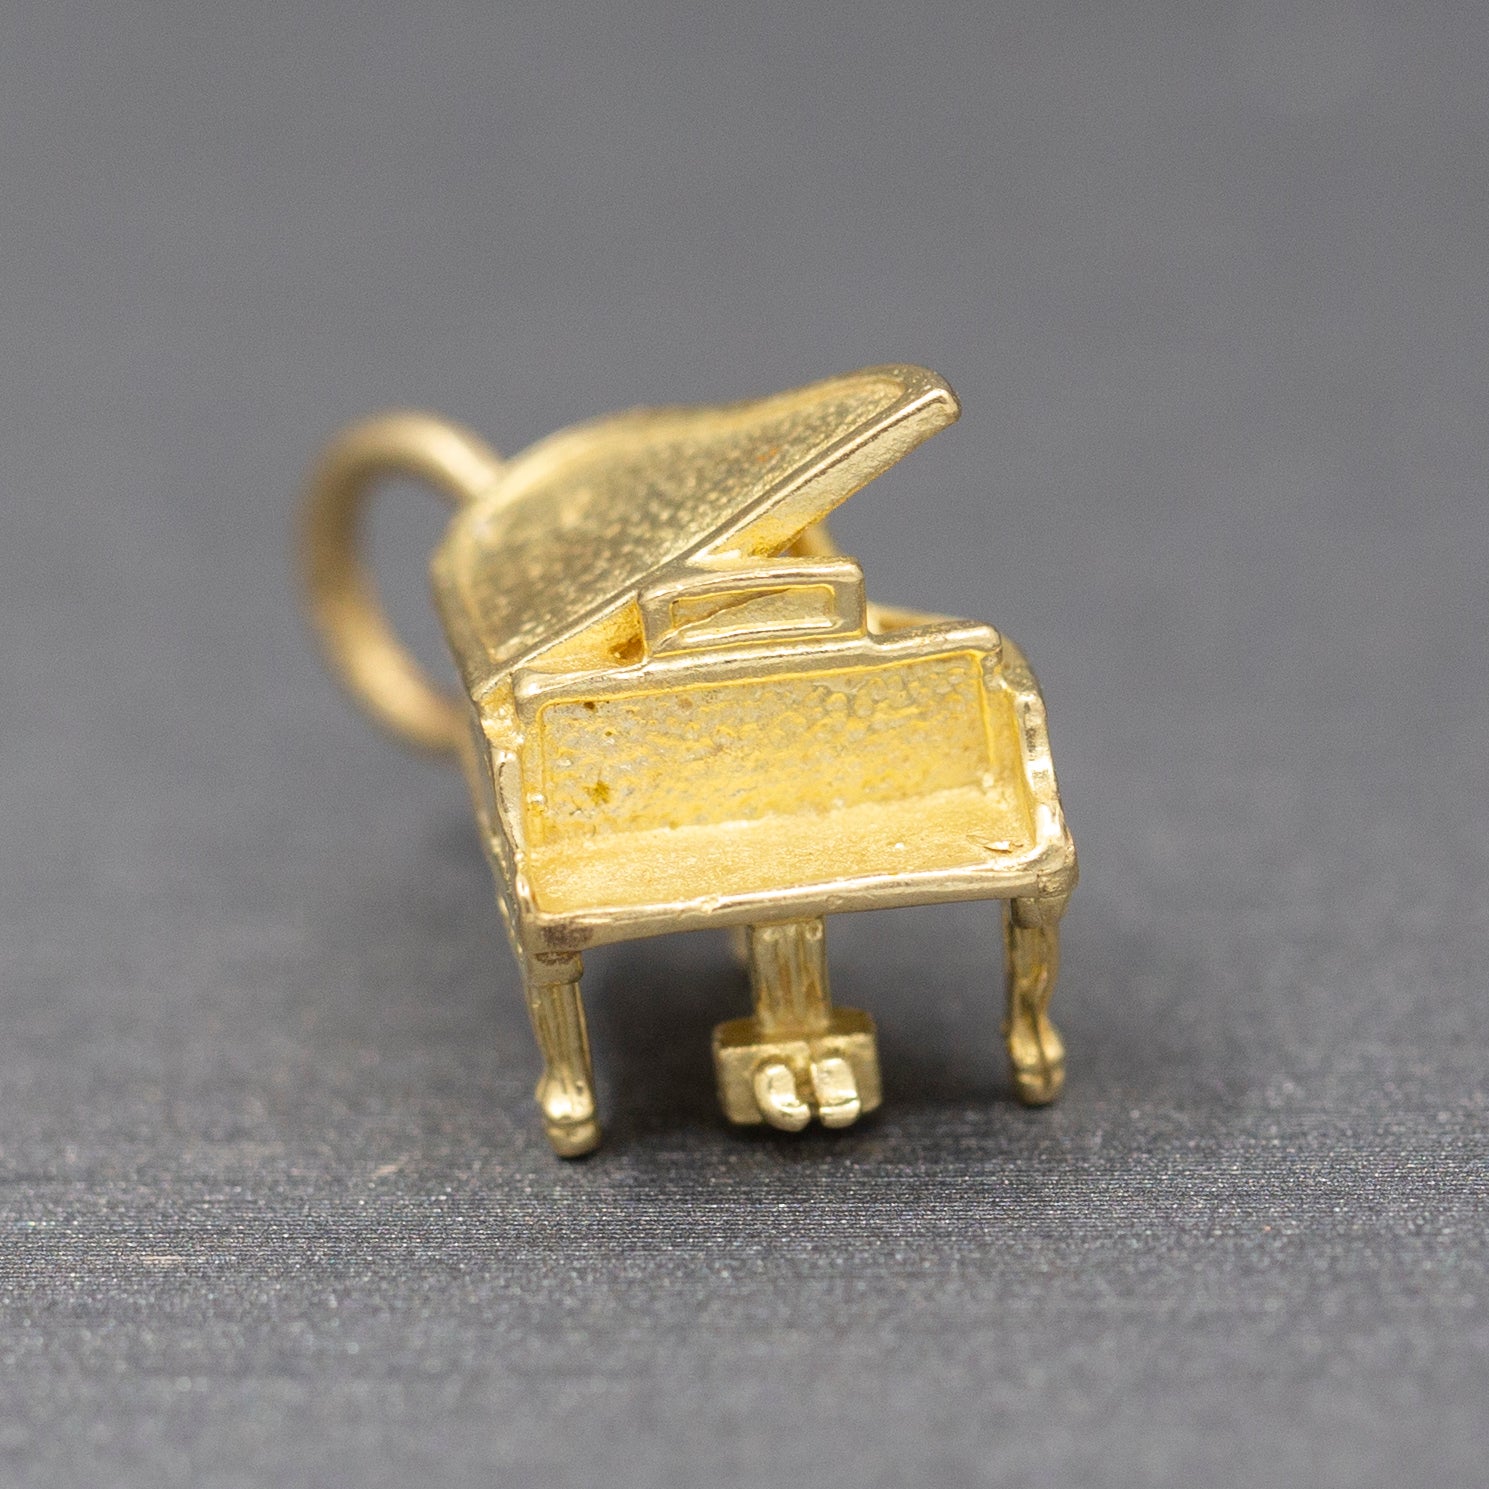 Vintage Grand Piano Charm Pendant in 14k Yellow Gold